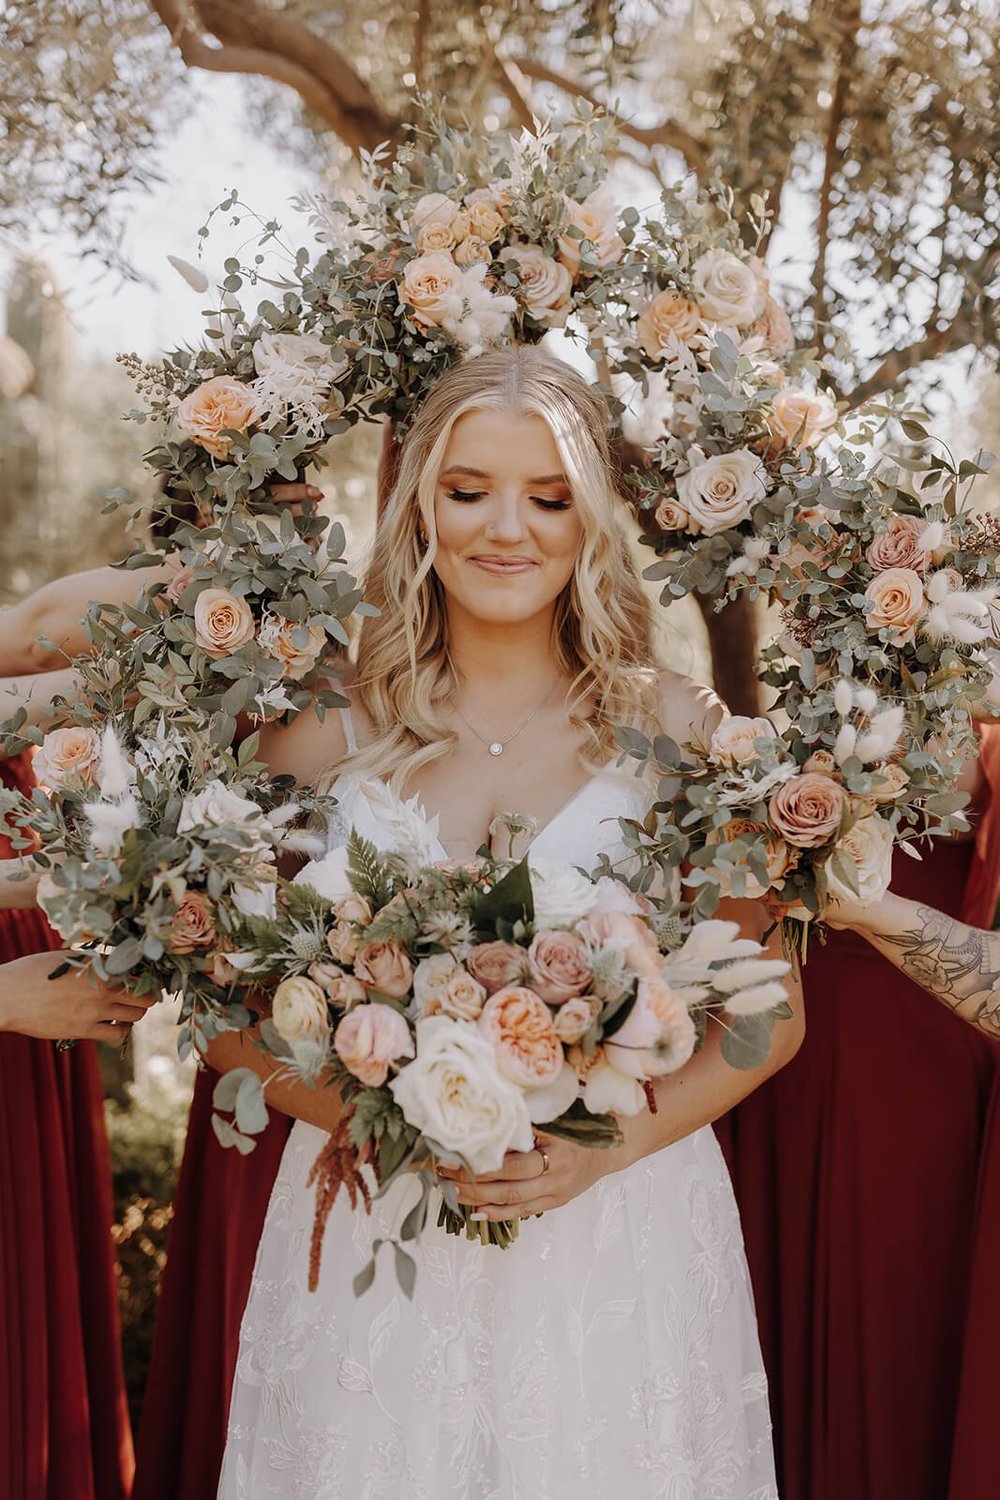 Bride standing with floral wreath